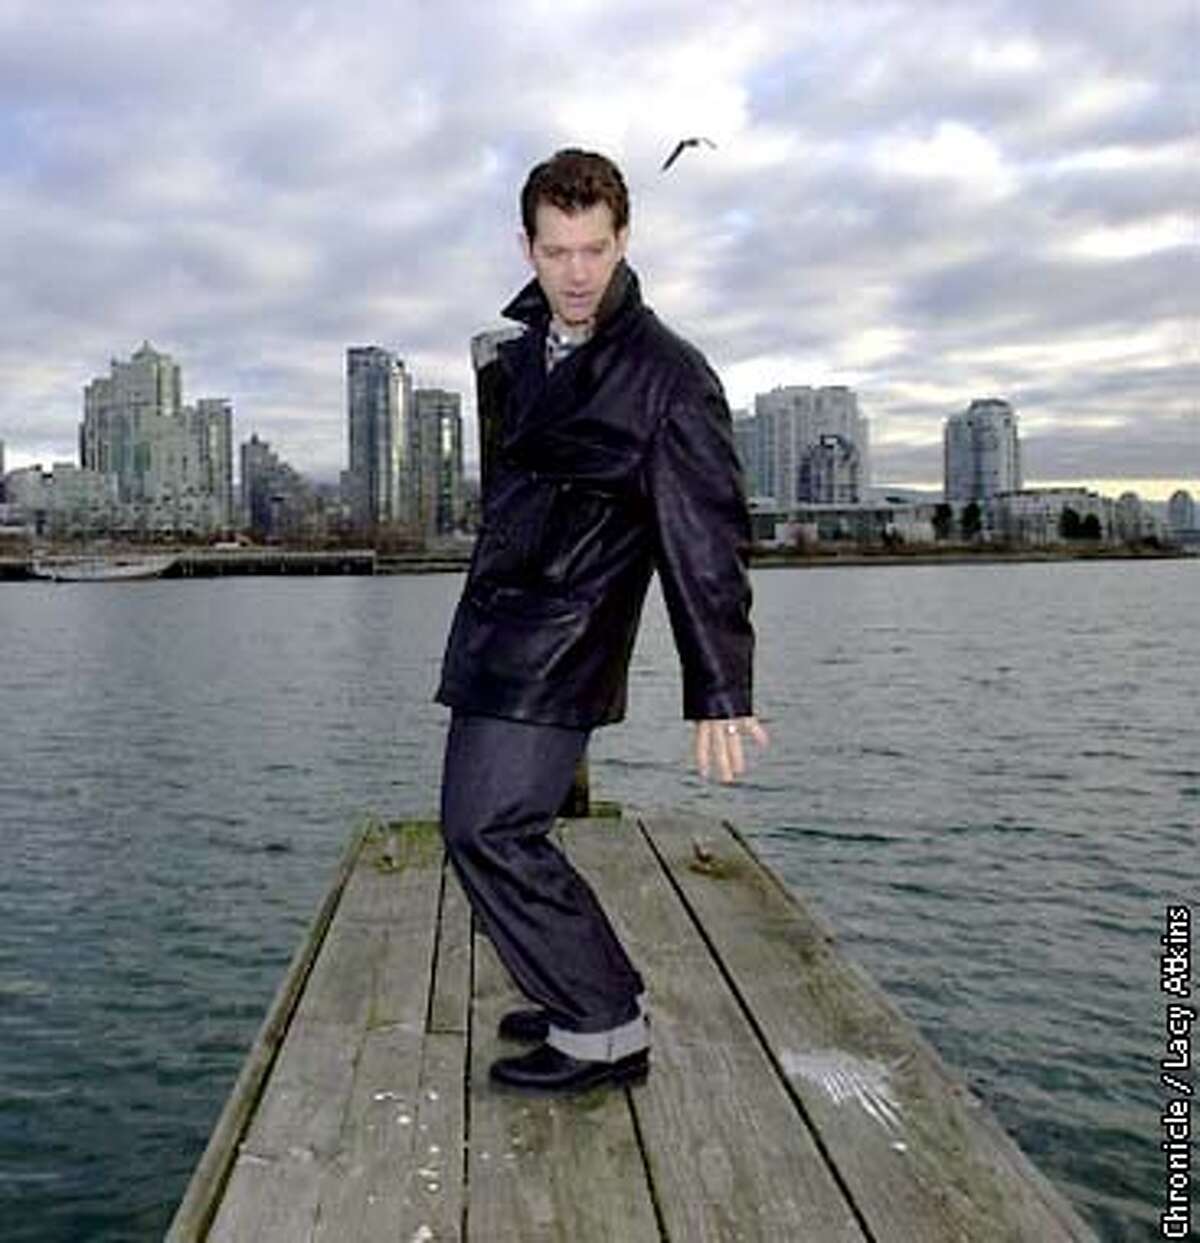 ISAAK-C-7FEB01-DD-LA Chris Isaak, stands on the dock, "This is the closes thing I get to surfing here", Isaak jokes as he pretends he's on a surfboard on the bay in Vancouver, Wed. Feb.7, 01. Photo By Lacy Atkins/San Francisco Chronicle